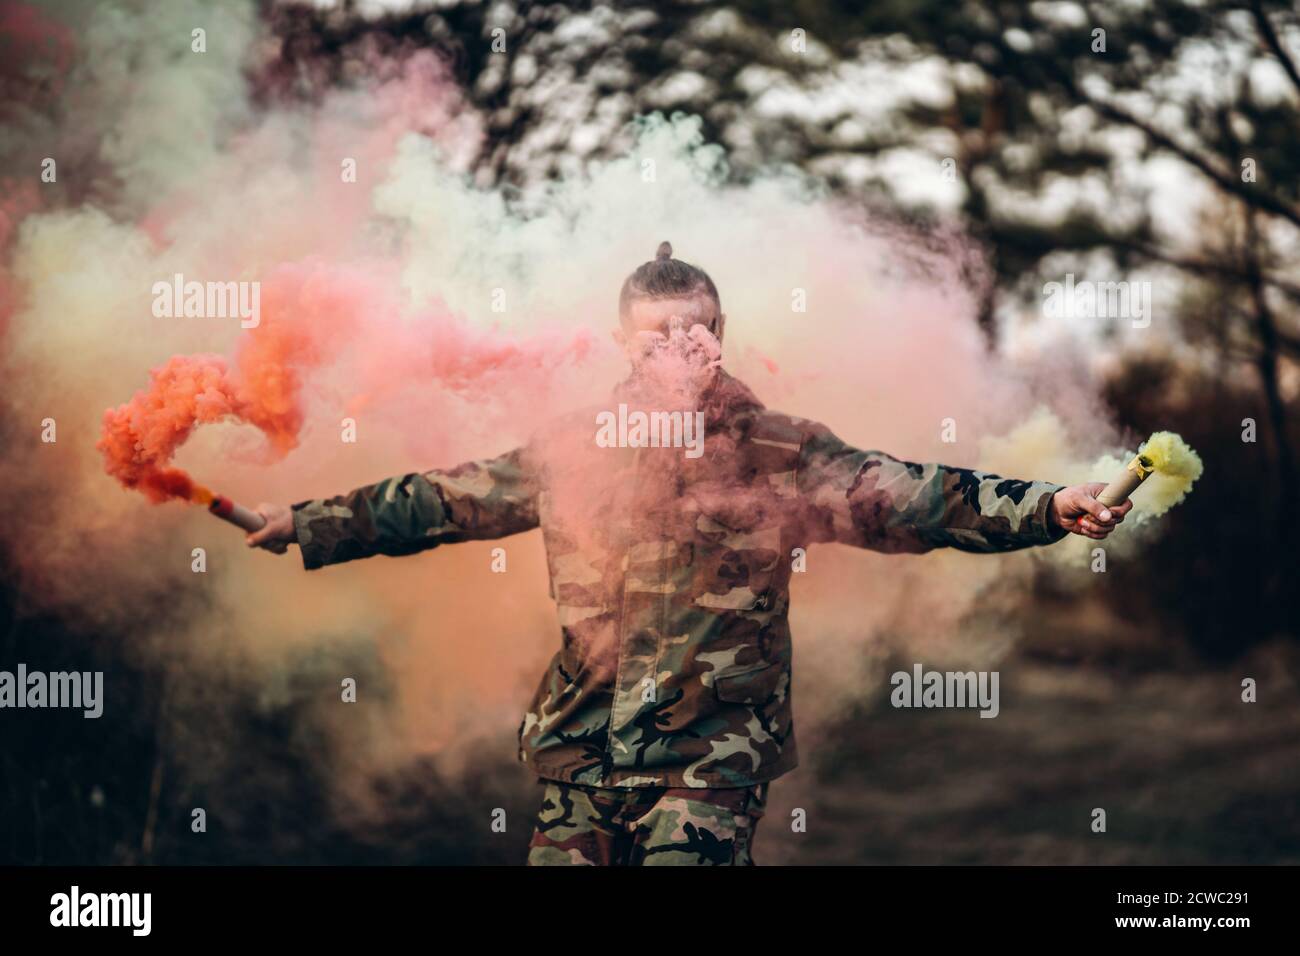 Man in camouflage uniform with black stripes on his face in the forest. In her hands, she holds red and white smoke bombs. Stock Photo